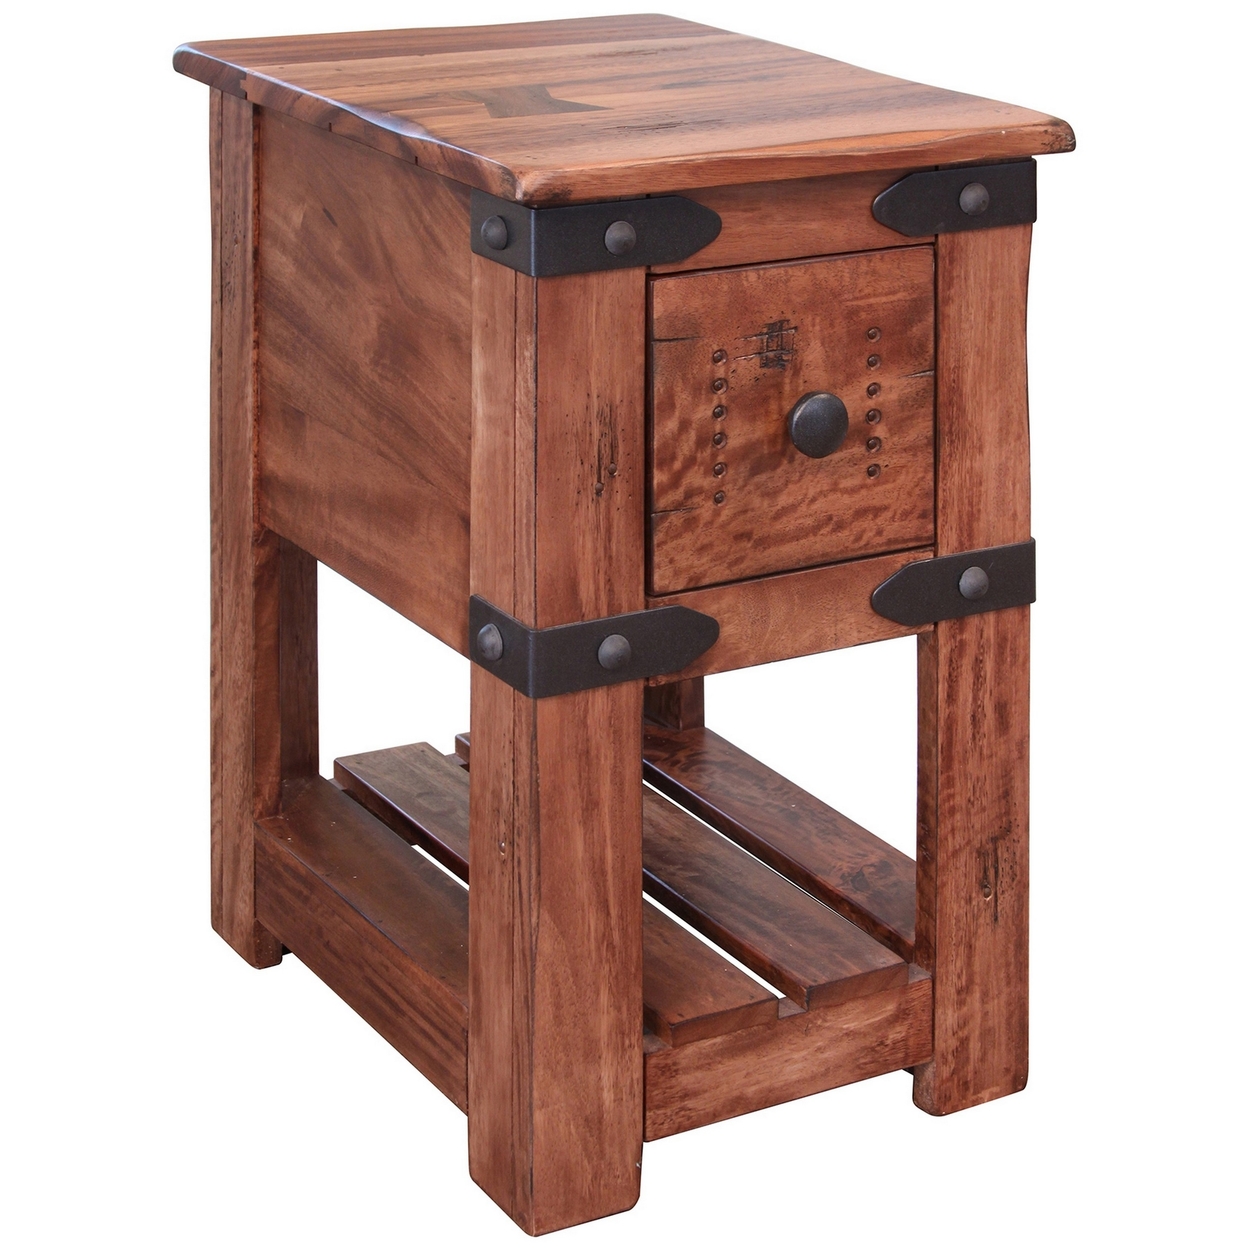 Umey 24 Inch 1 Drawer Narrow Chairside End Table, Belt Accents, Brown Wood- Saltoro Sherpi